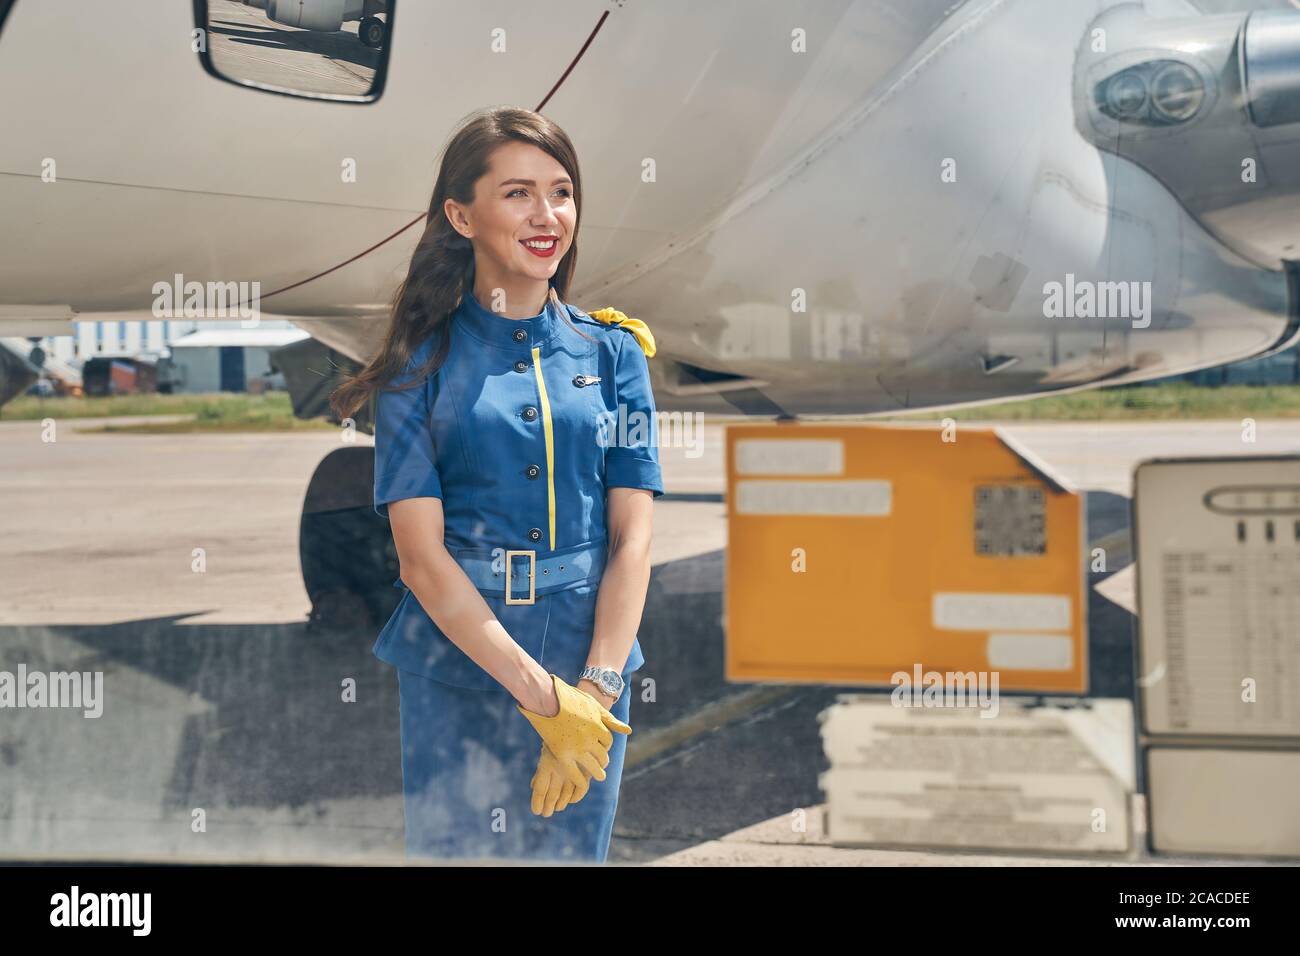 High-spirited flight attendant standing by an airplane Stock Photo